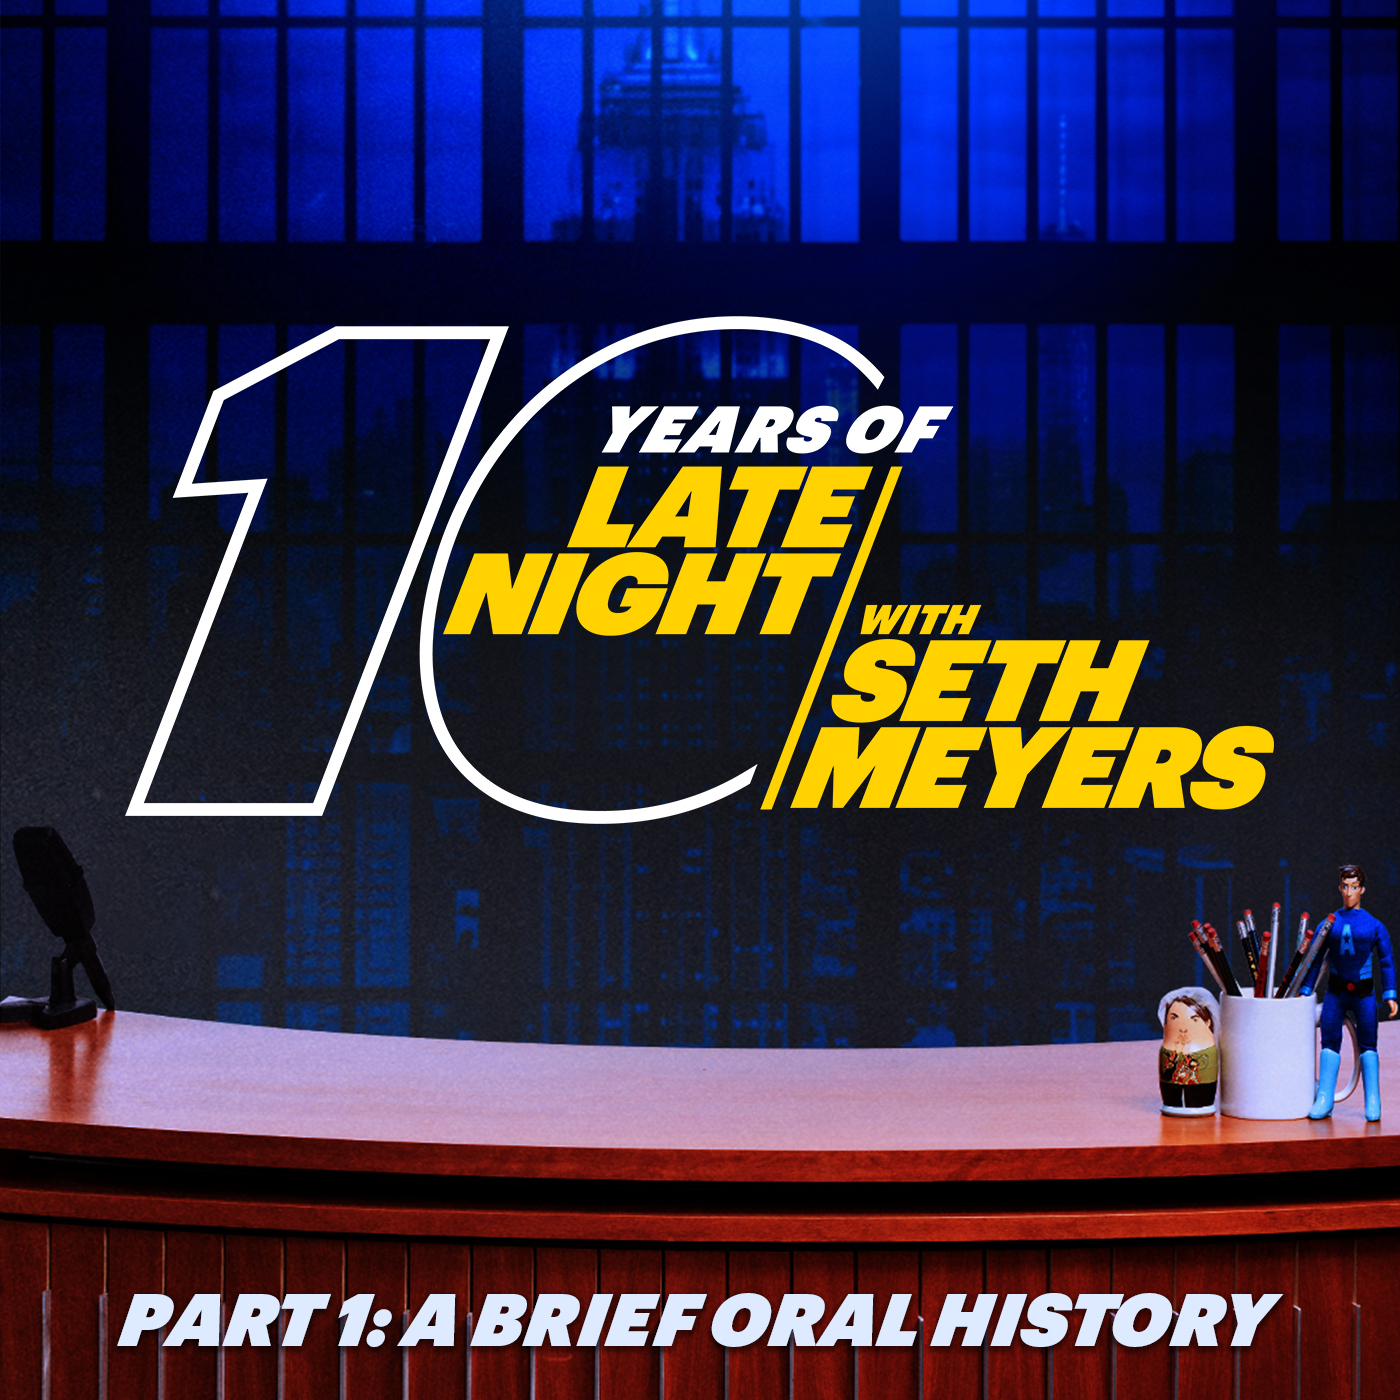 10 Years of Late Night with Seth Meyers, Part 1: A Brief Oral History